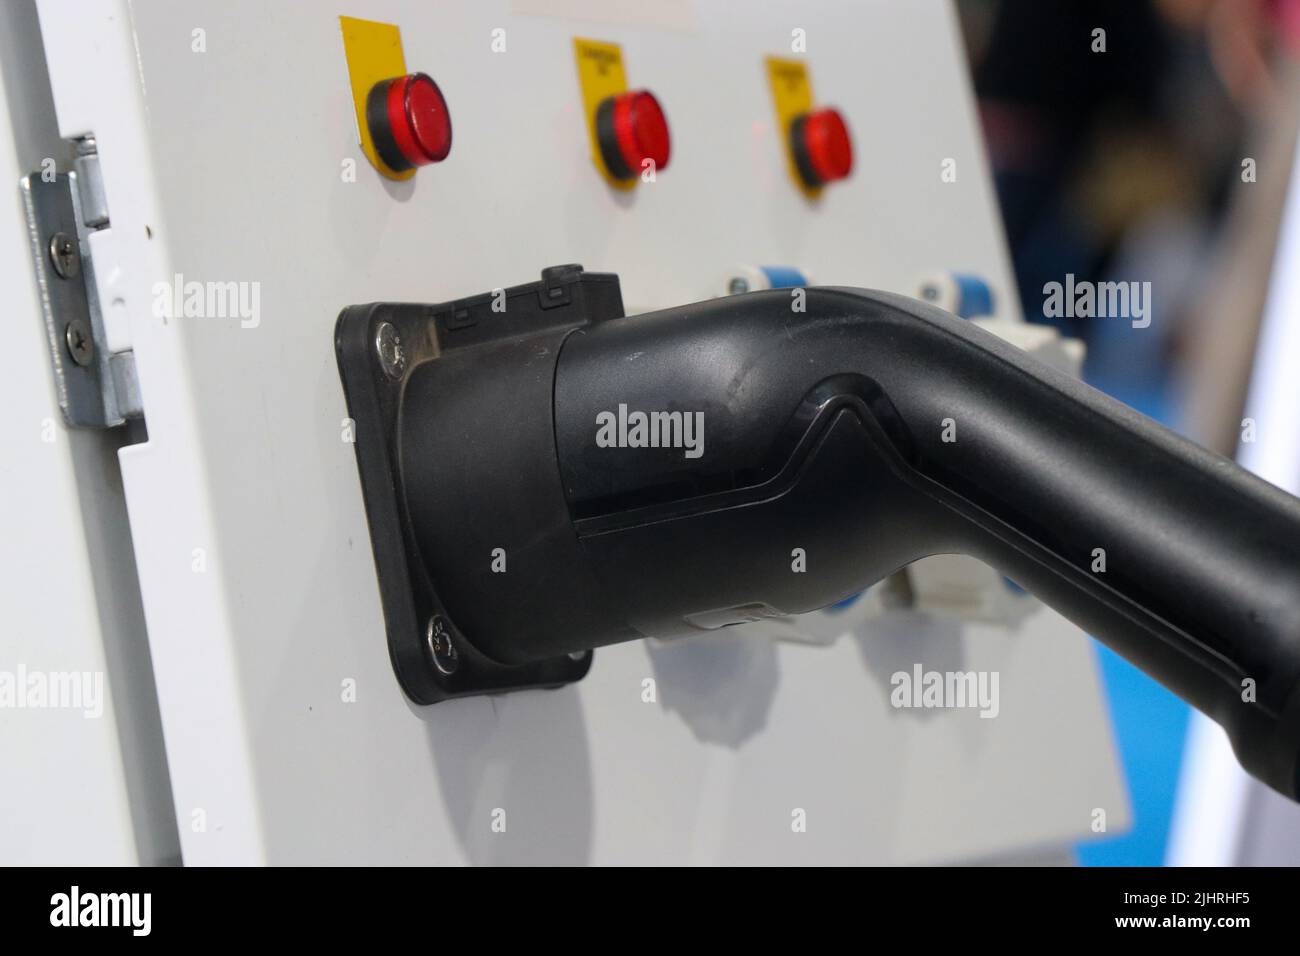 Charging panel or Charging board with the plug connected used to charge electric vehicles or environmentally friendly zero emission cars Stock Photo